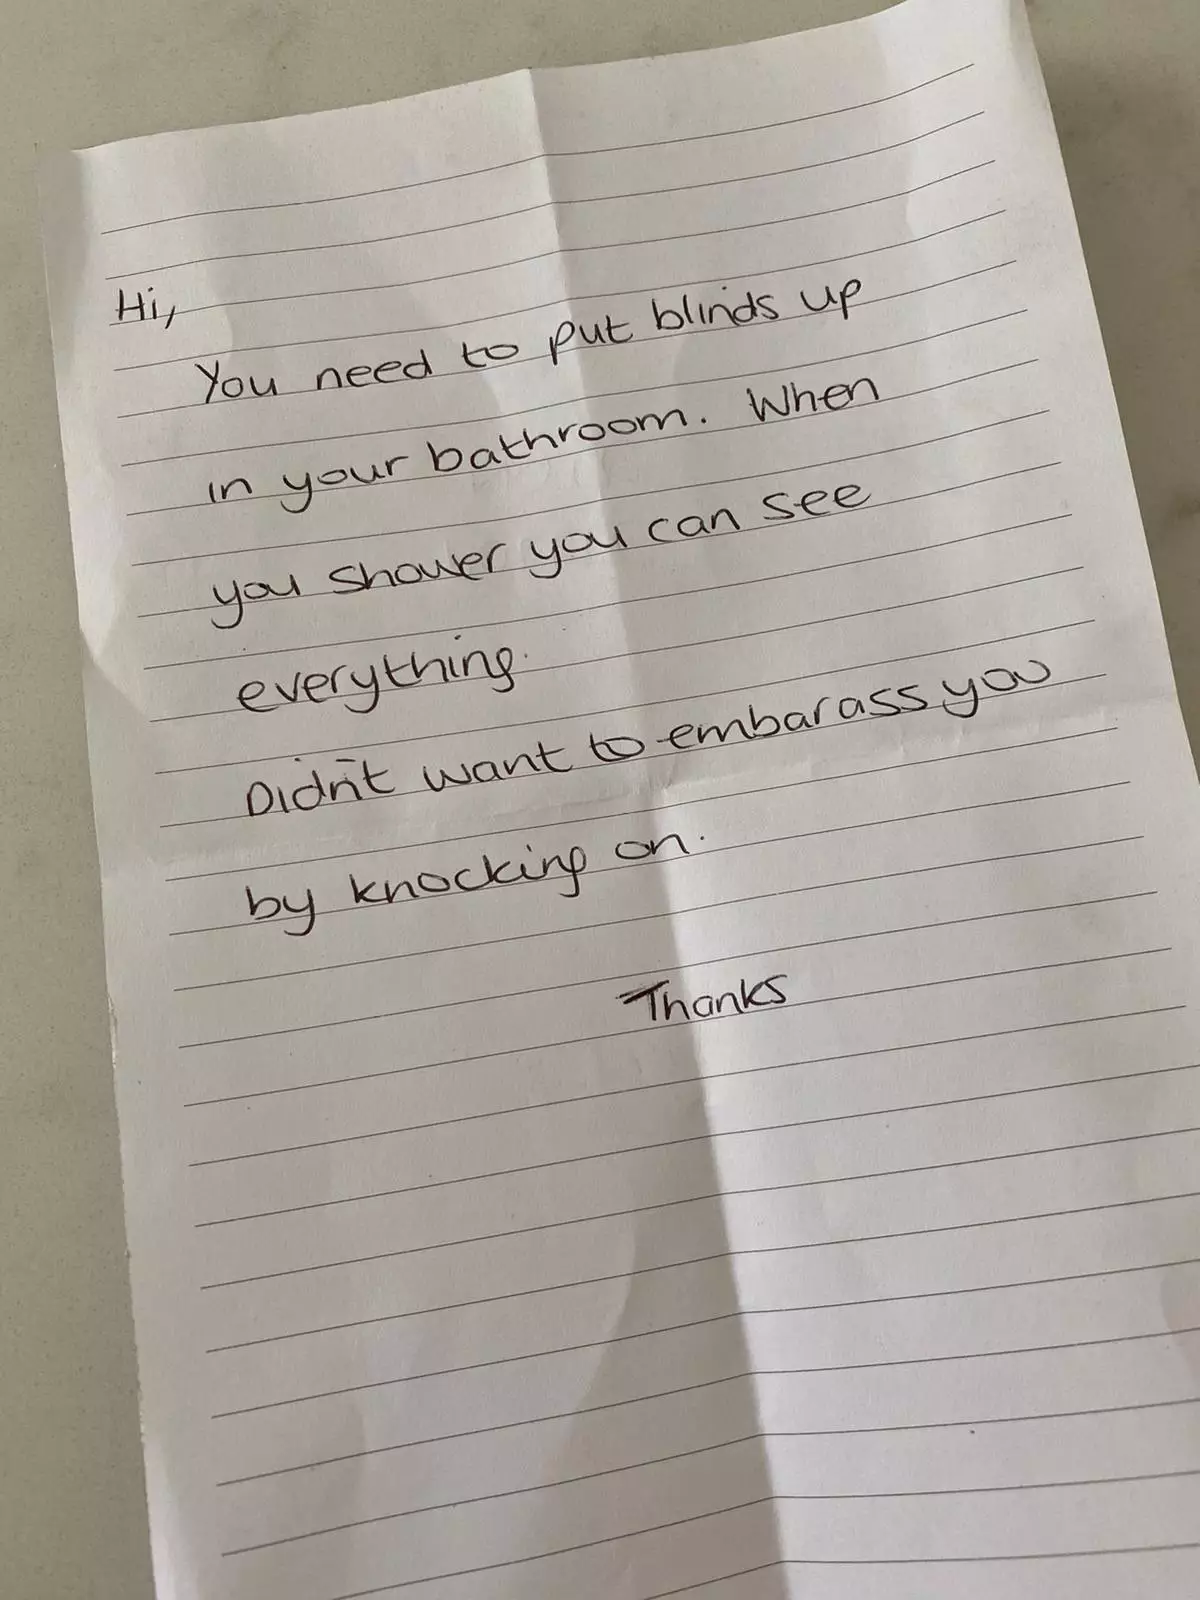 A neighbour decided to give her a heads up with a letter.